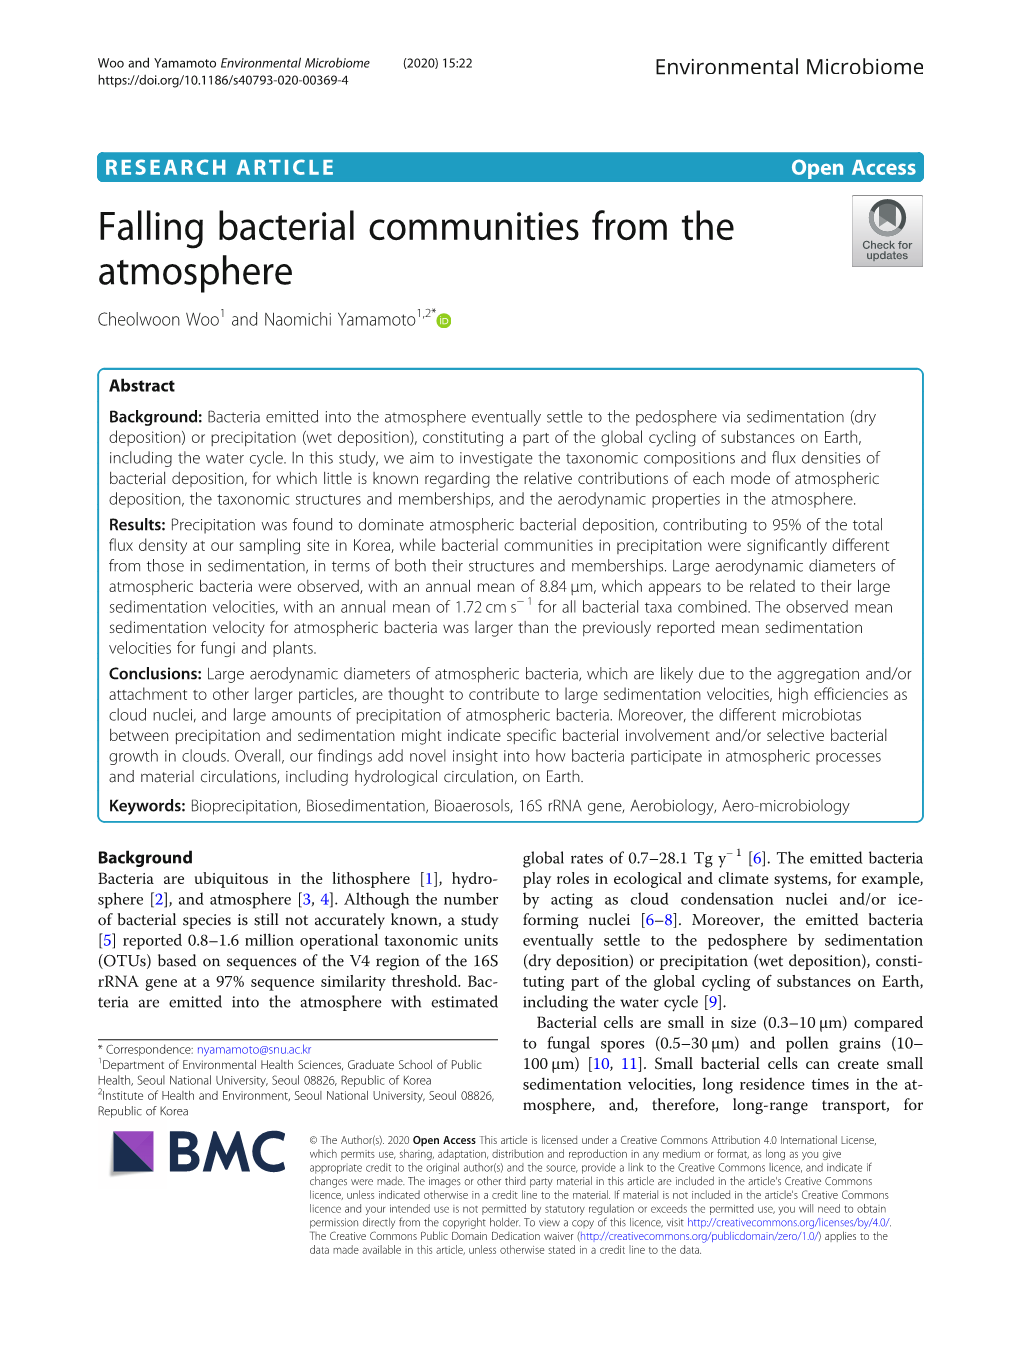 Falling Bacterial Communities from the Atmosphere Cheolwoon Woo1 and Naomichi Yamamoto1,2*